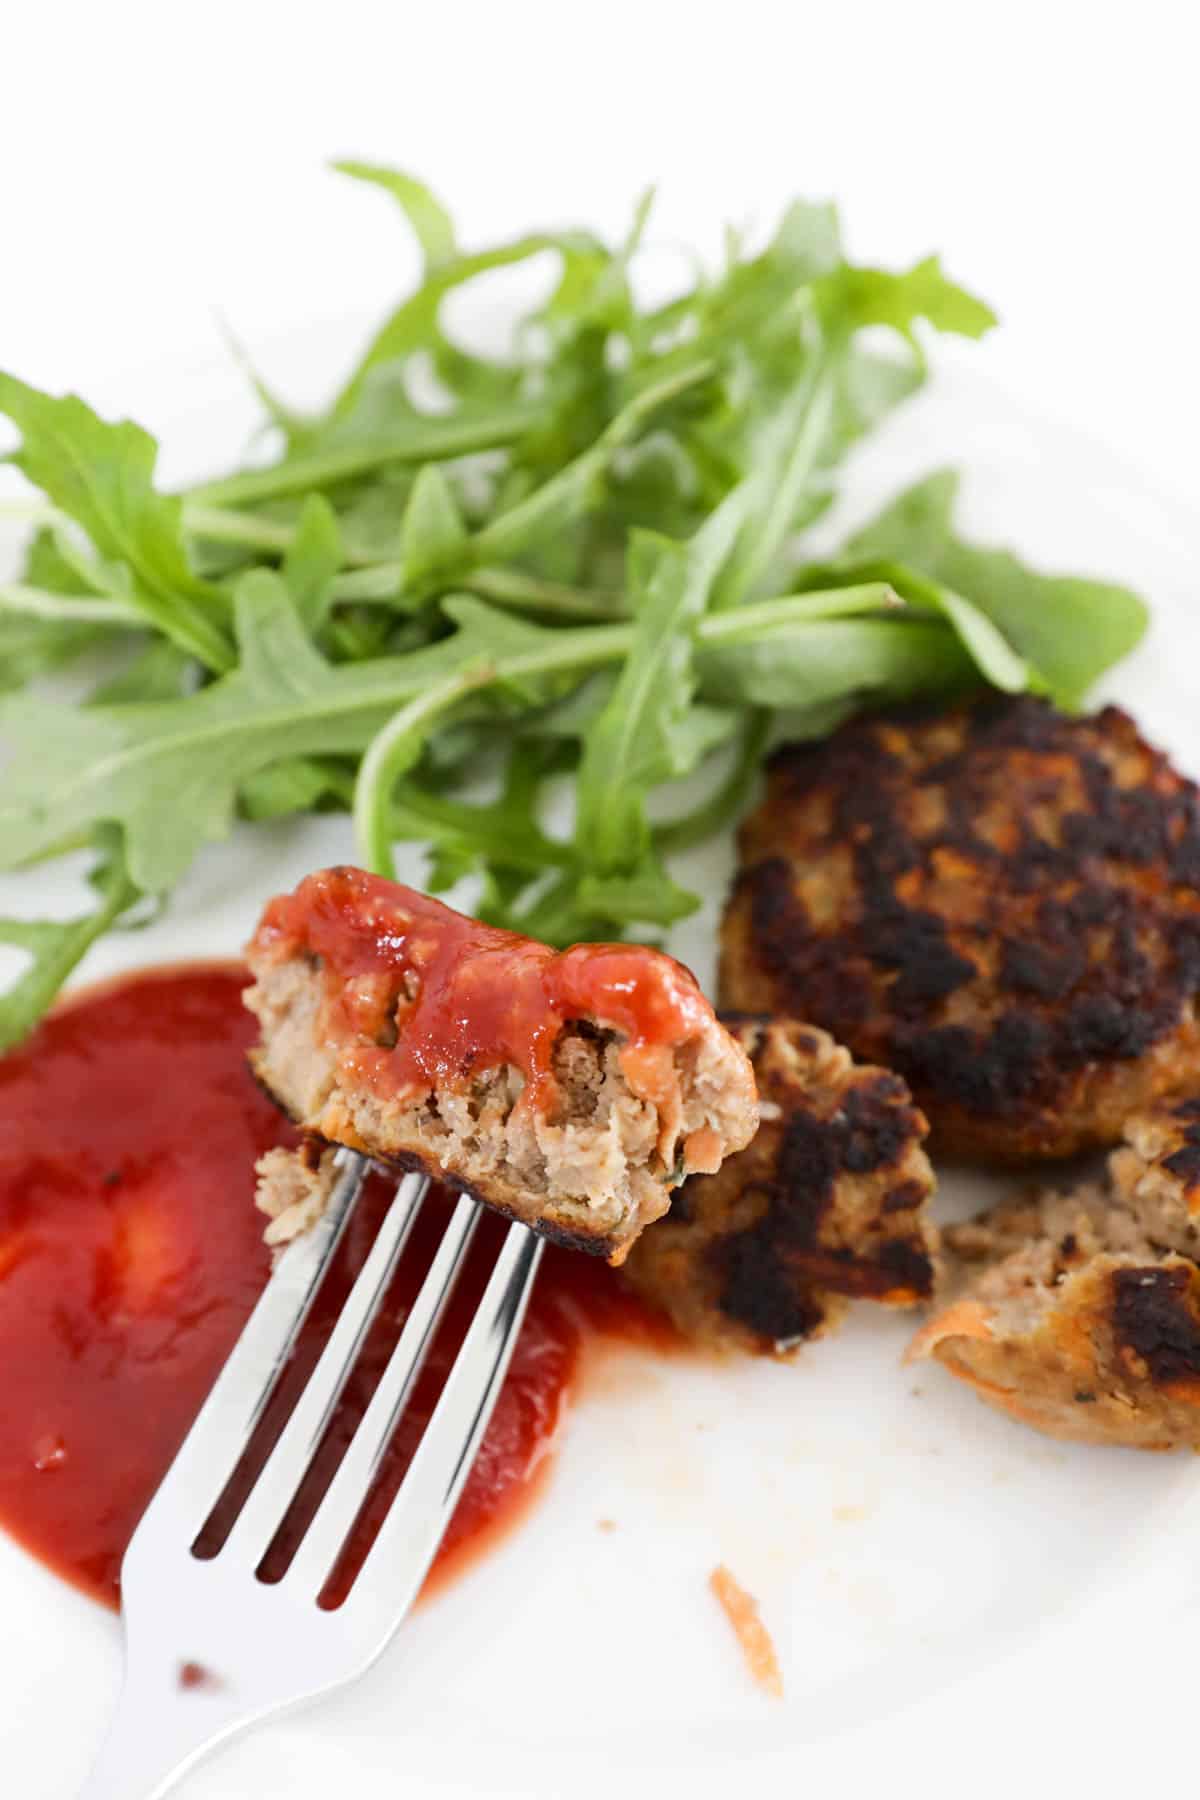 Tomato sauce on meat patties served with a rocket salad.